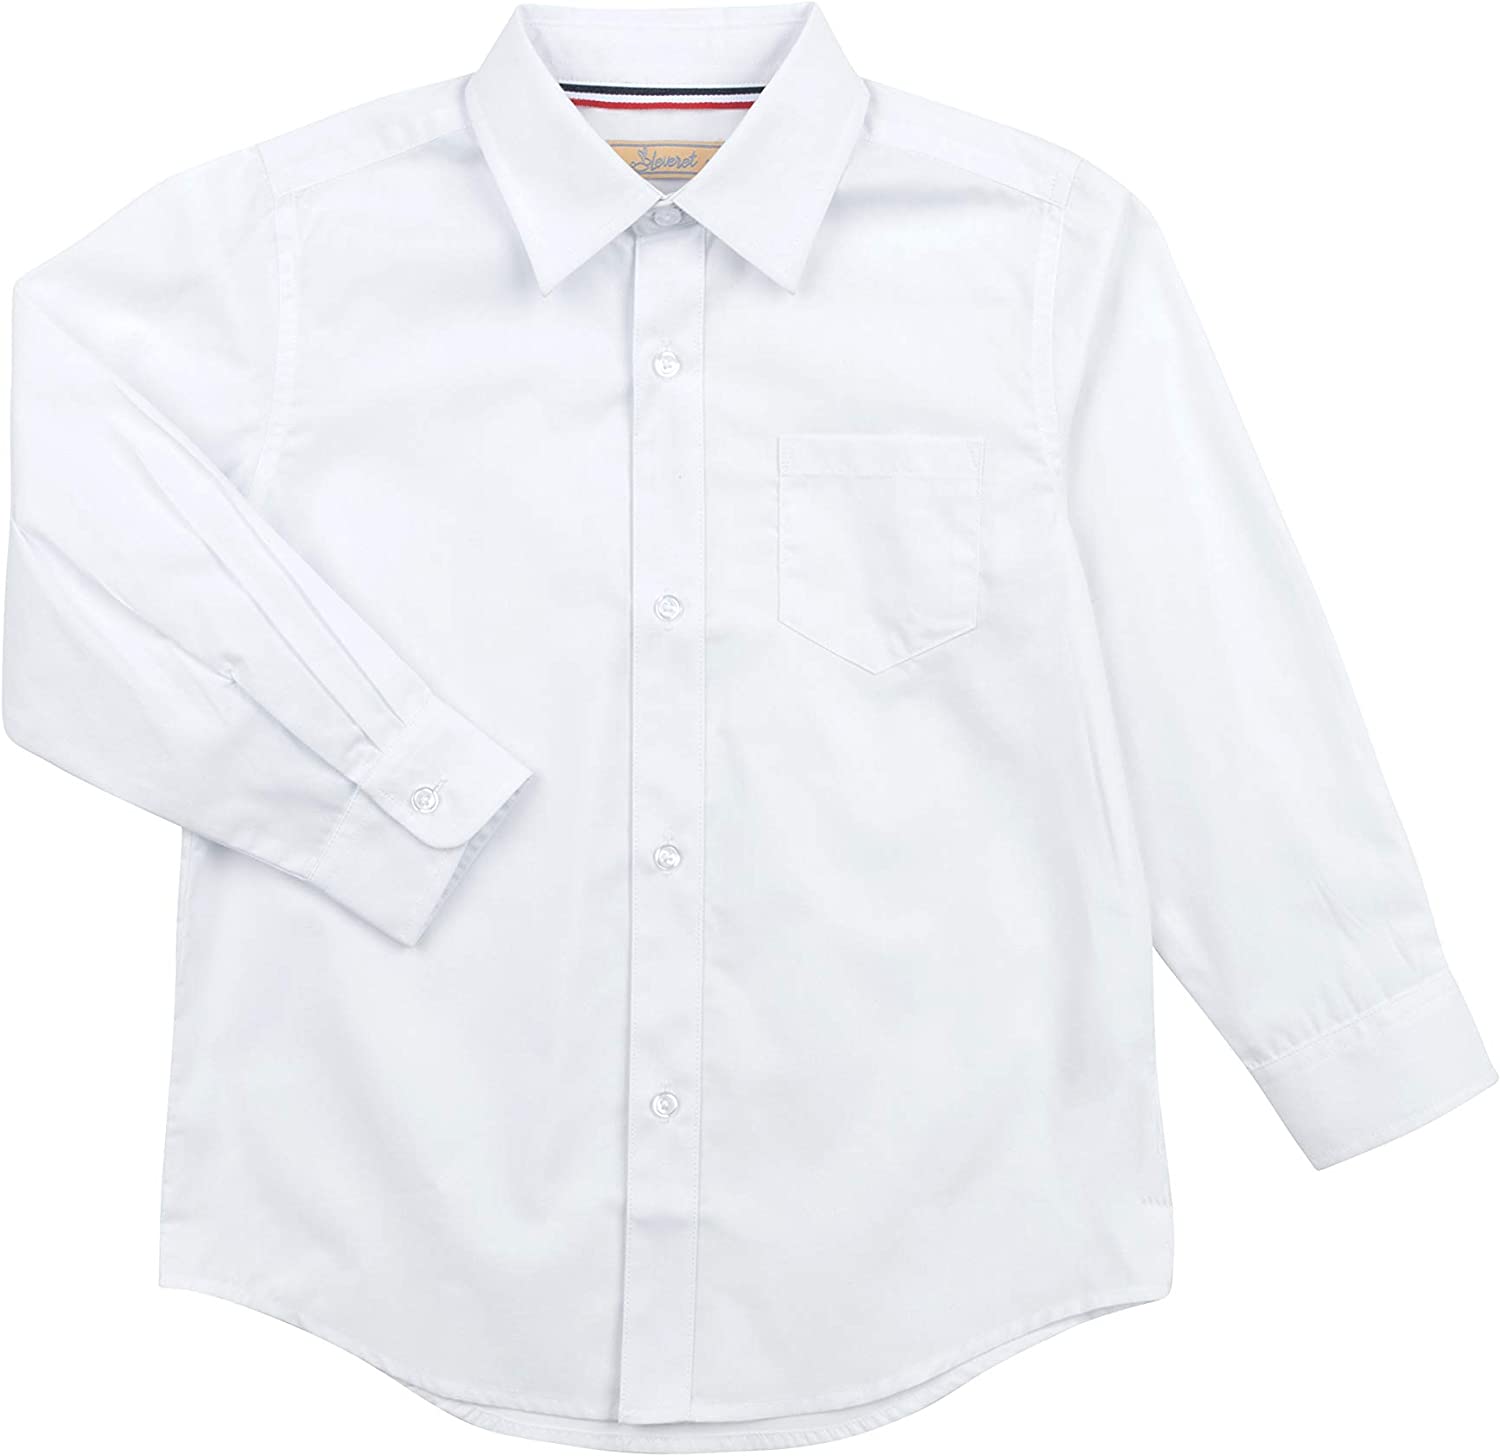 Leveret Kids & Toddler Boys Long Sleeve Uniform Cotton Dress Shirt Variety of Colors (Size 2-14 Years) (White, 3 Years) - image 3 of 3